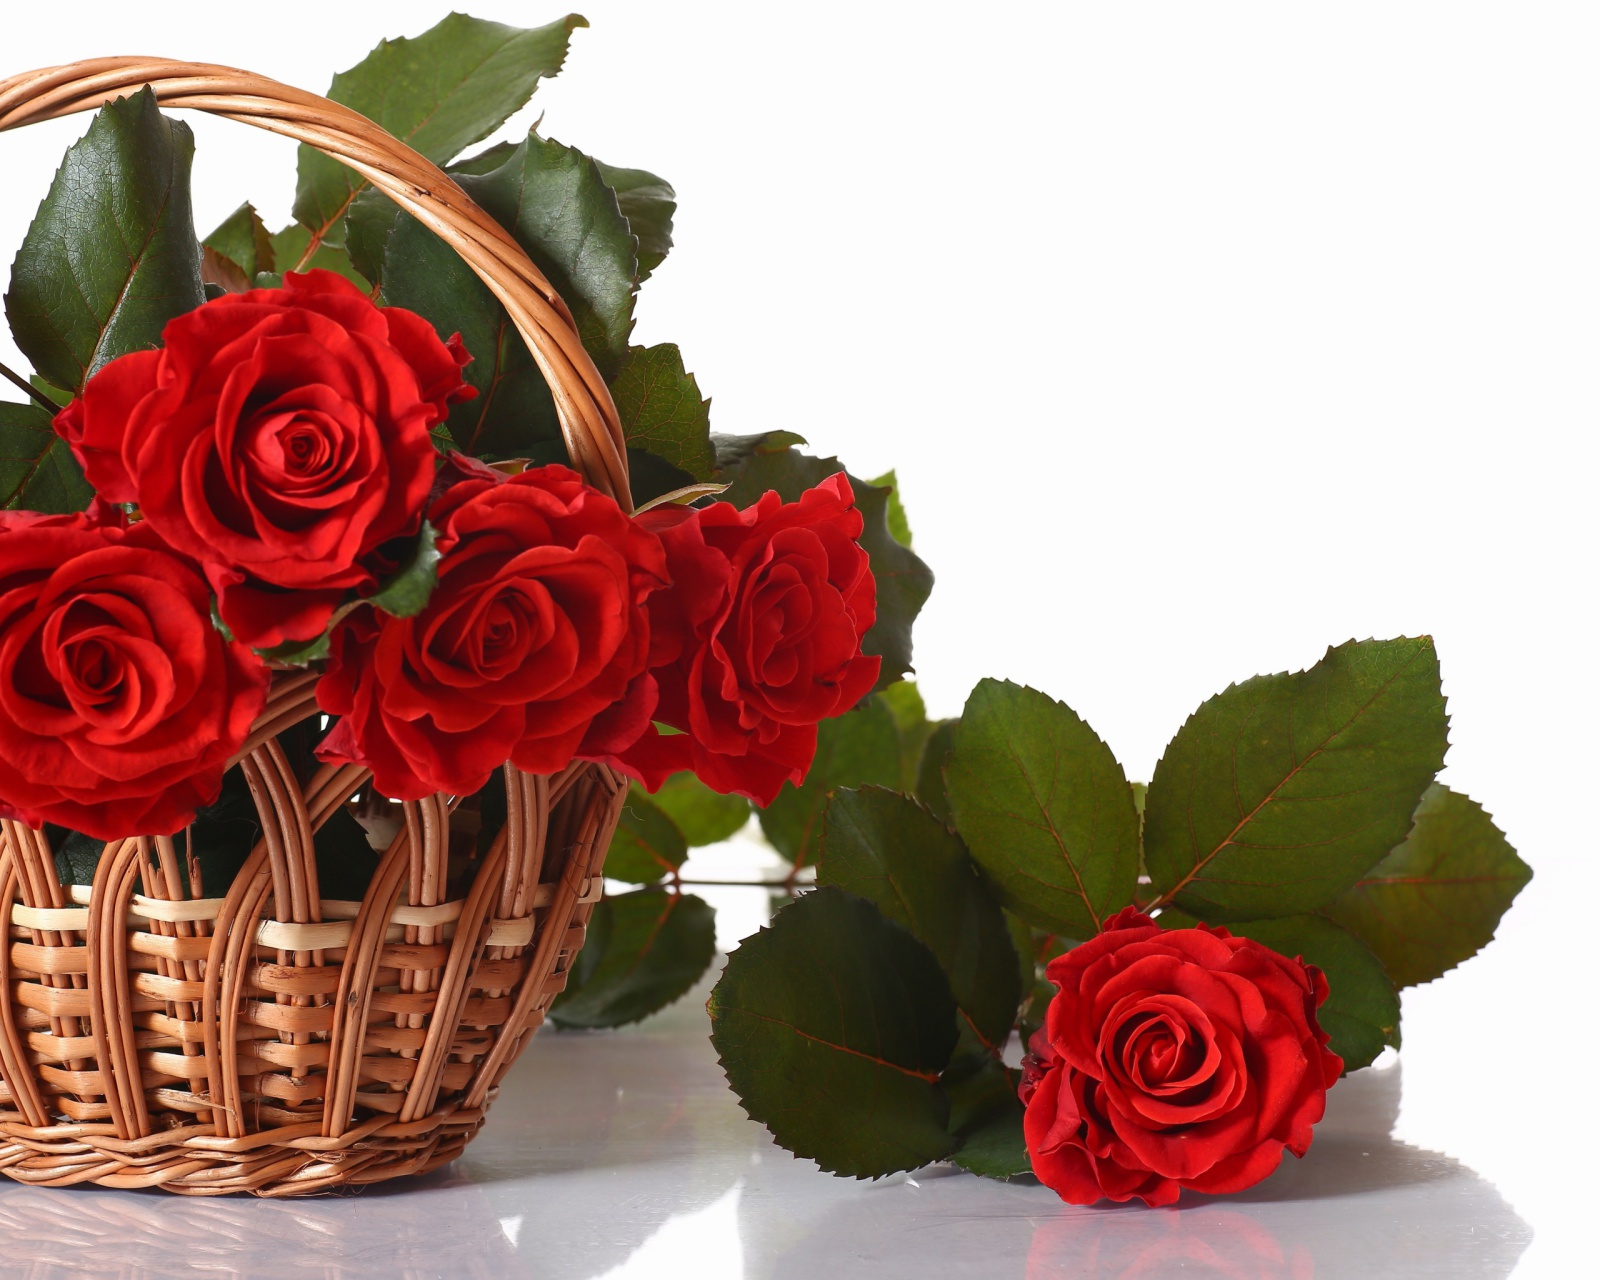 Das Basket with Roses Wallpaper 1600x1280